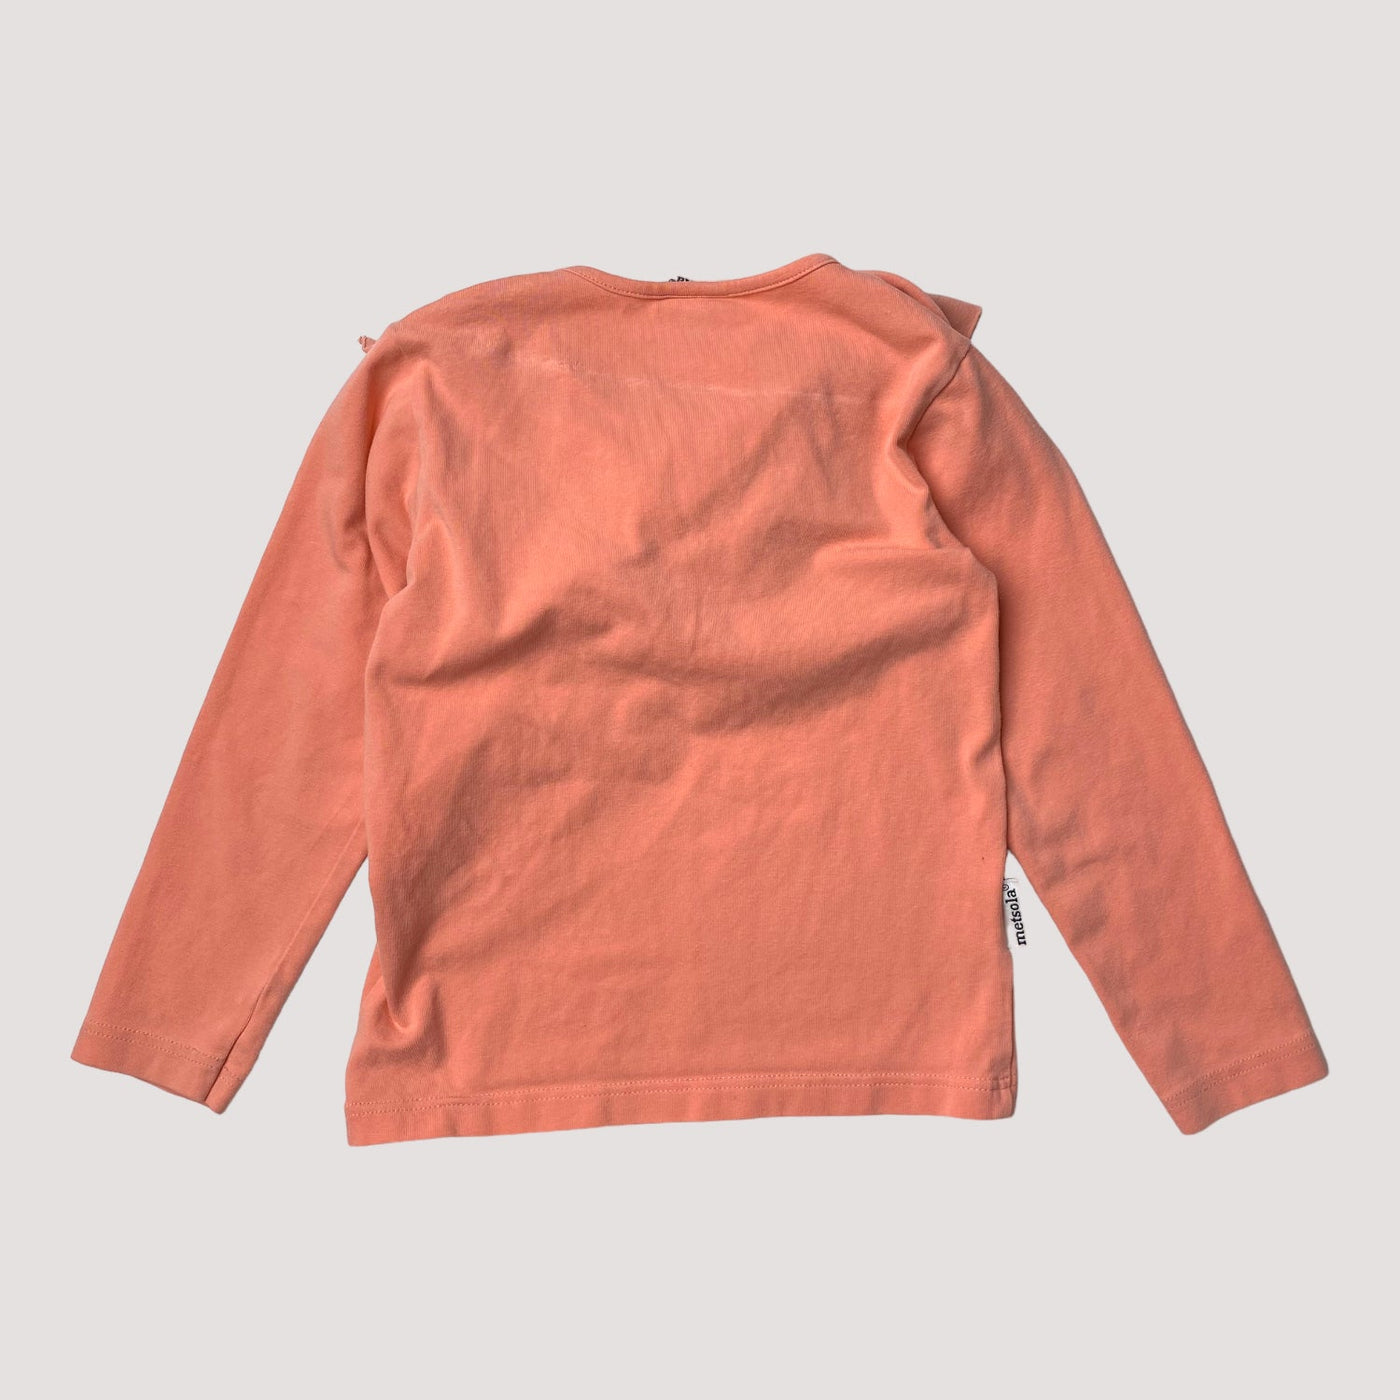 Metsola frill shirt, coral pink | 104cm